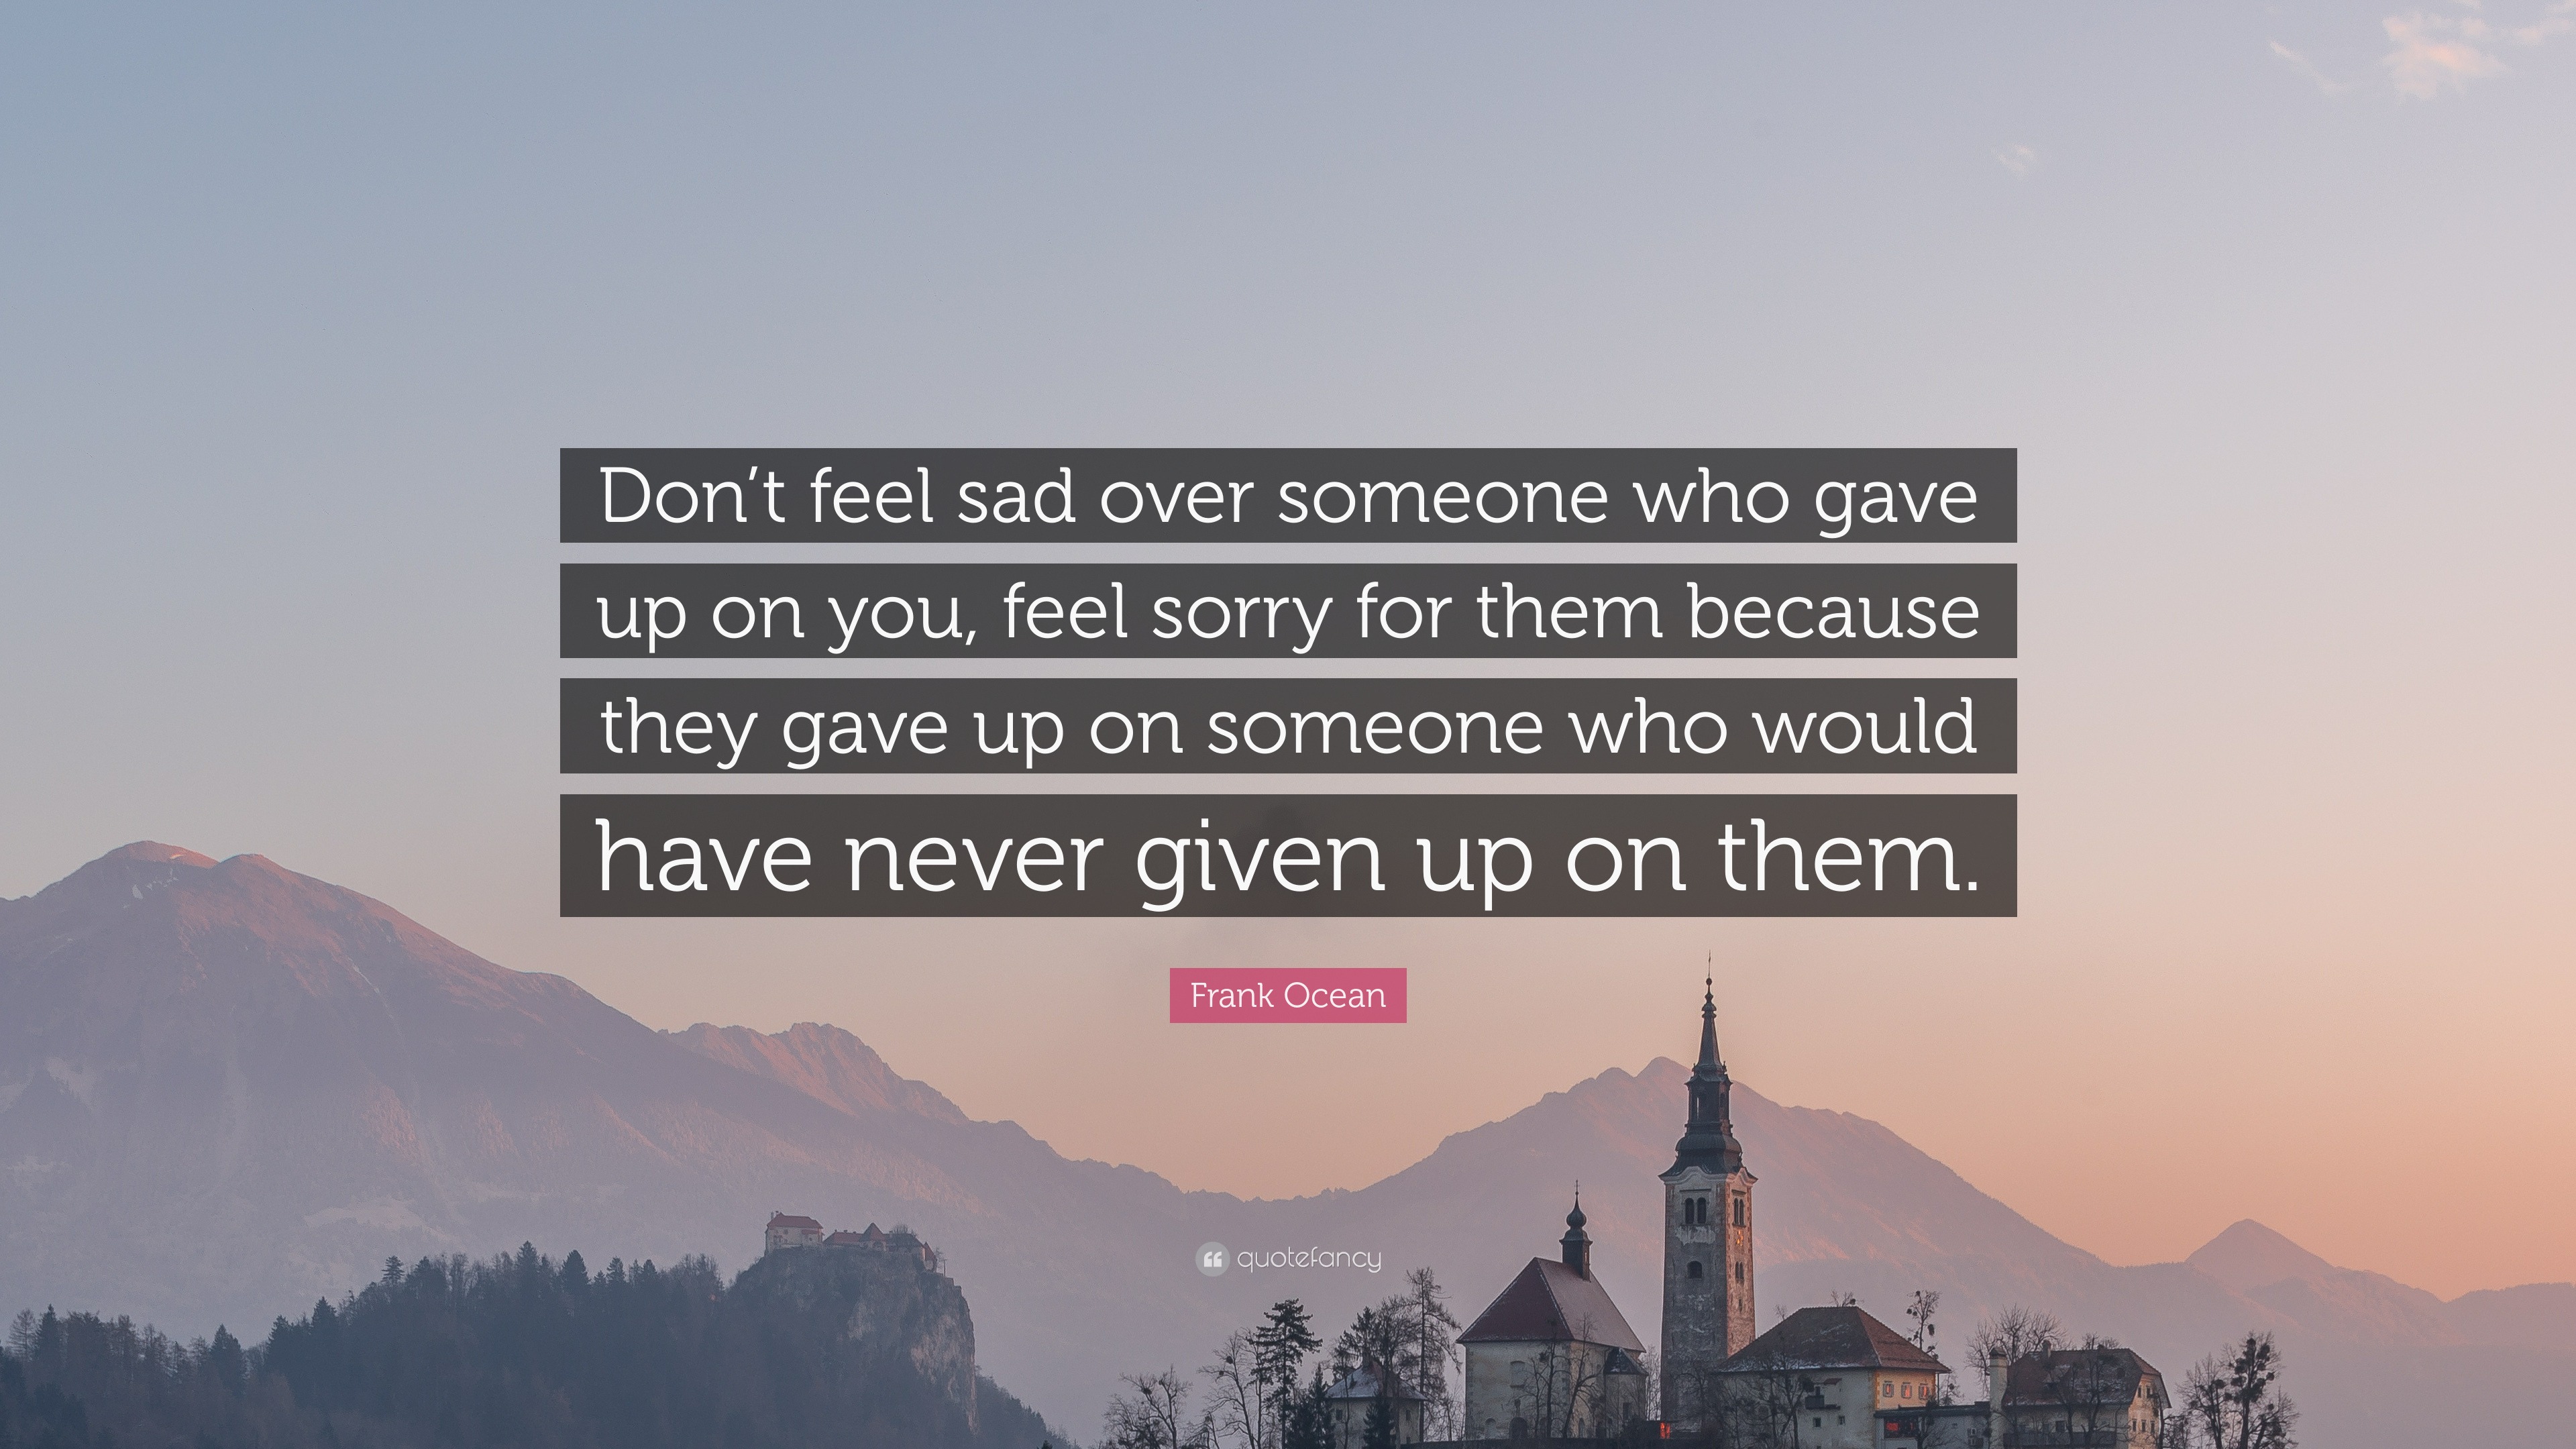 Frank Ocean Quote: “Don’t feel sad over someone who gave up on you ...